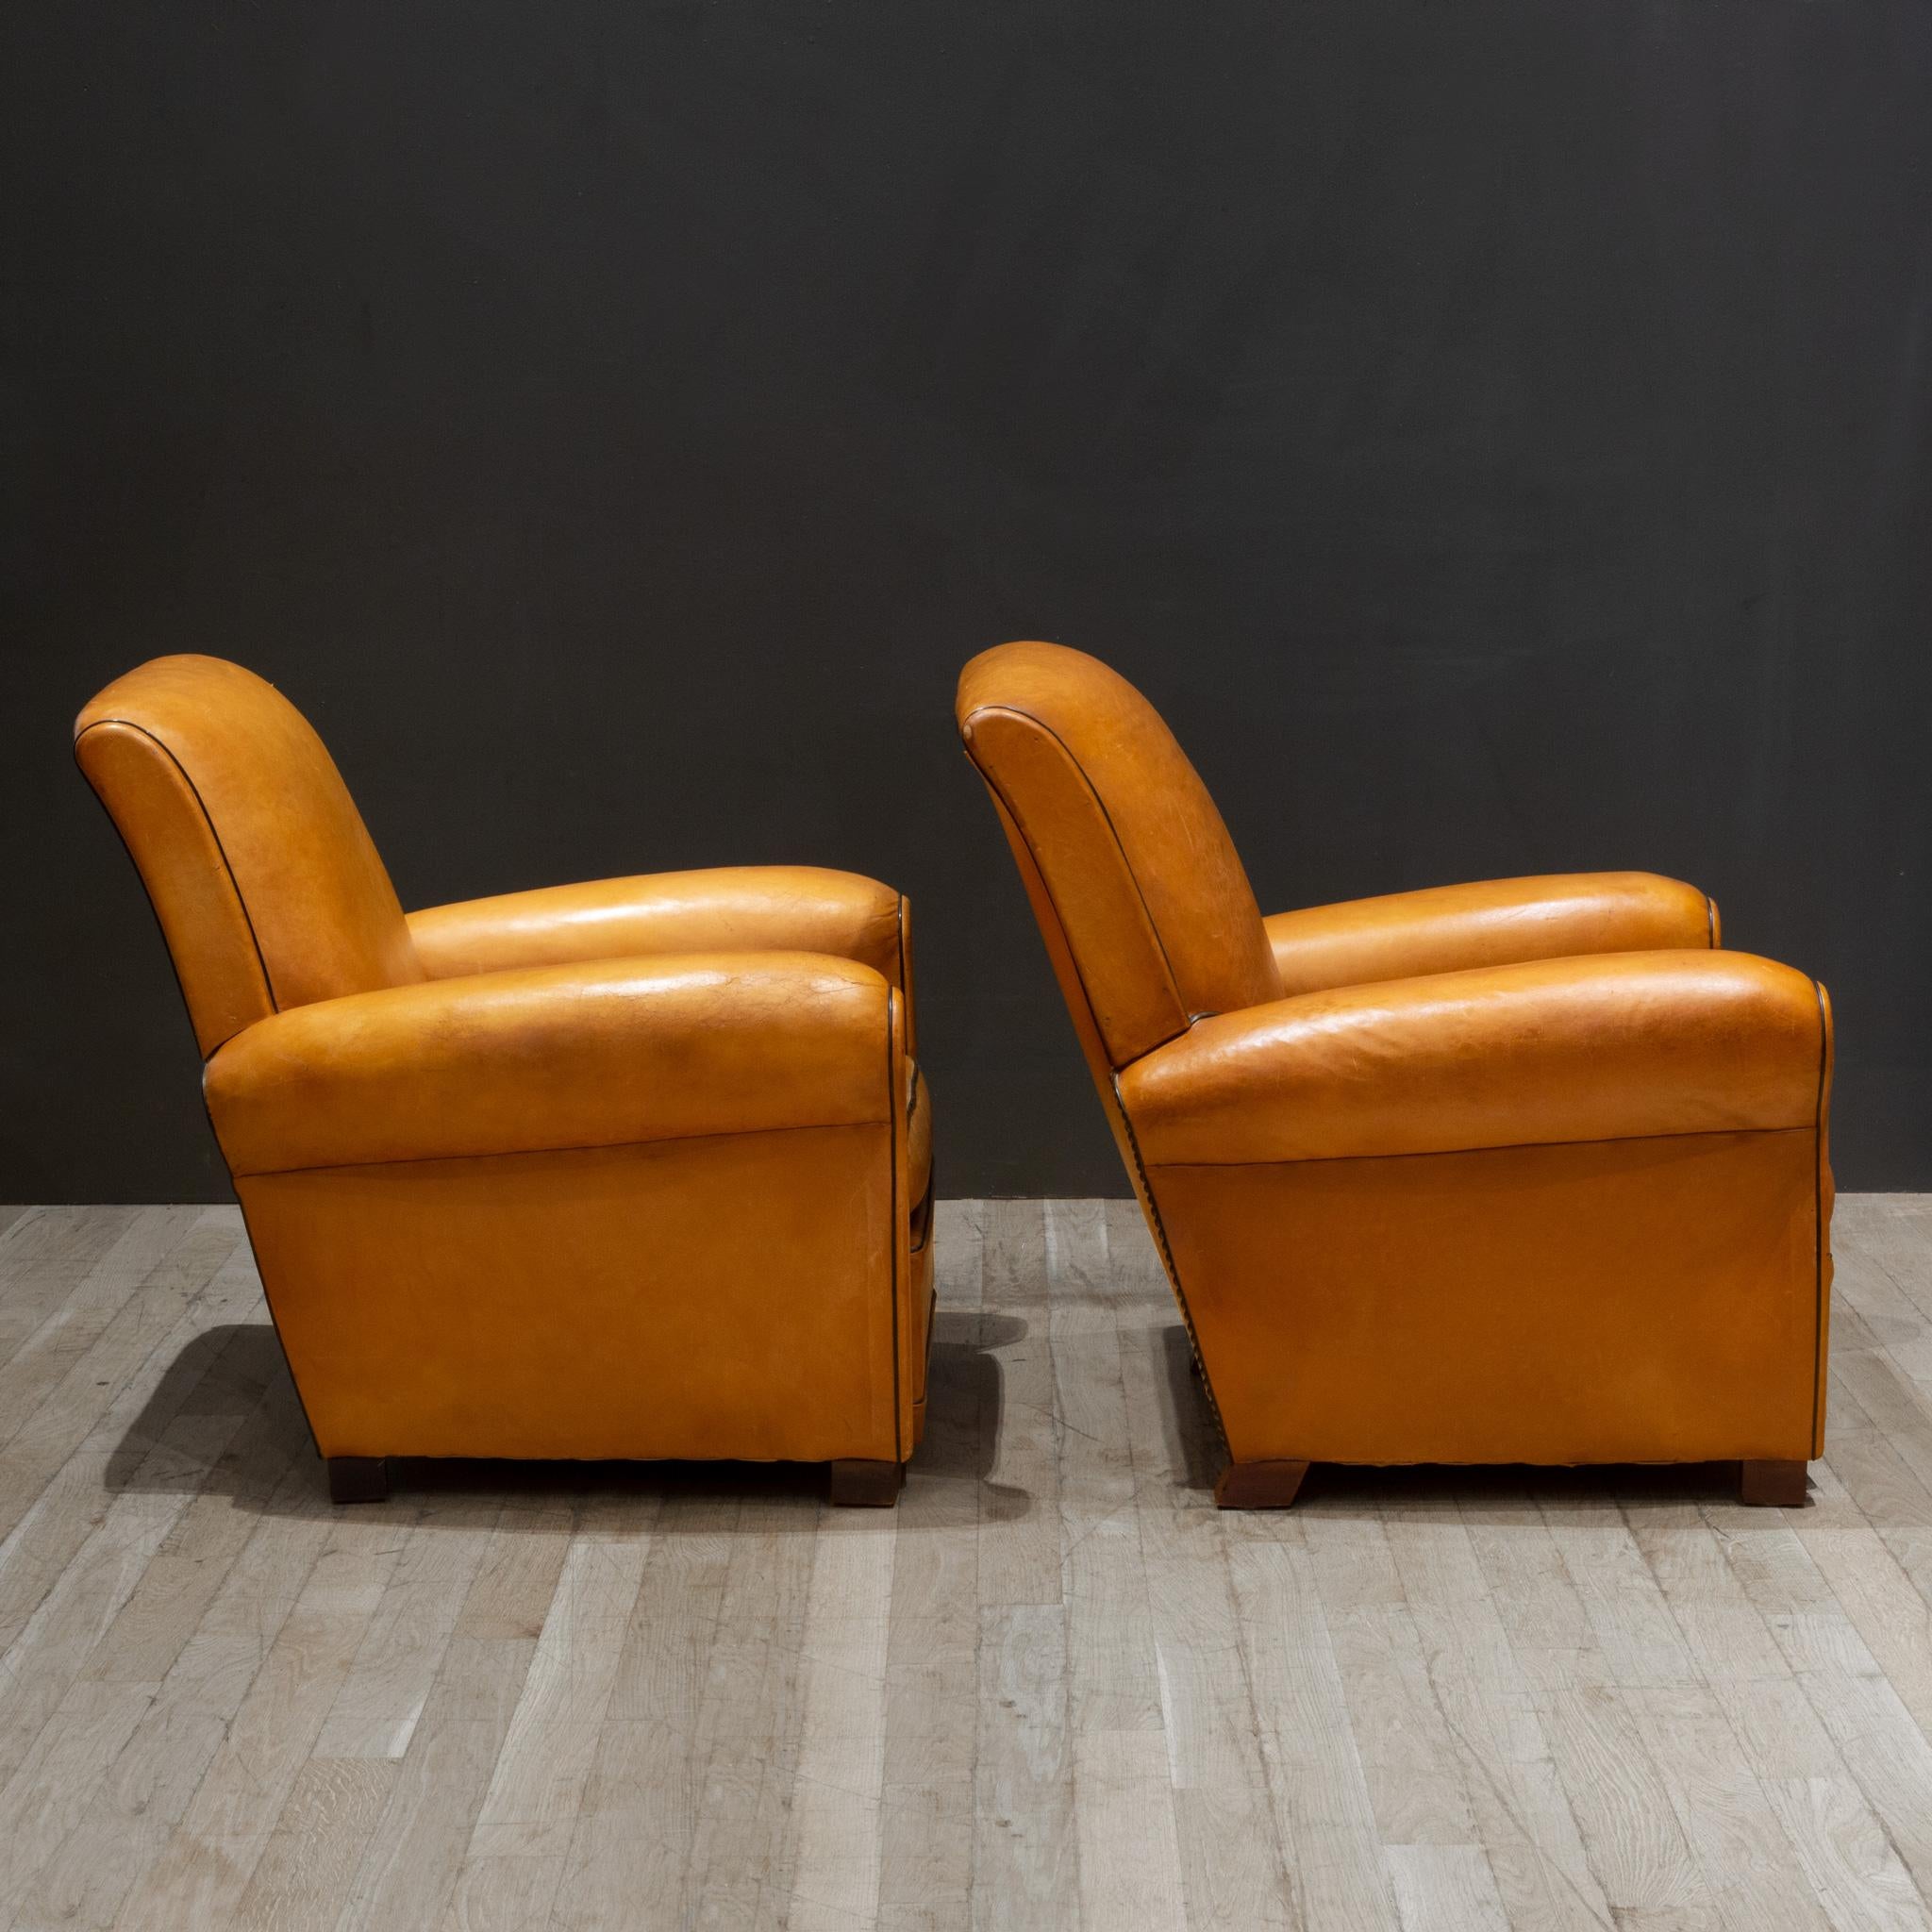 Pair of French Slopeback Light Caramel Leather Club Chairs c.1930-1940 In Good Condition For Sale In San Francisco, CA